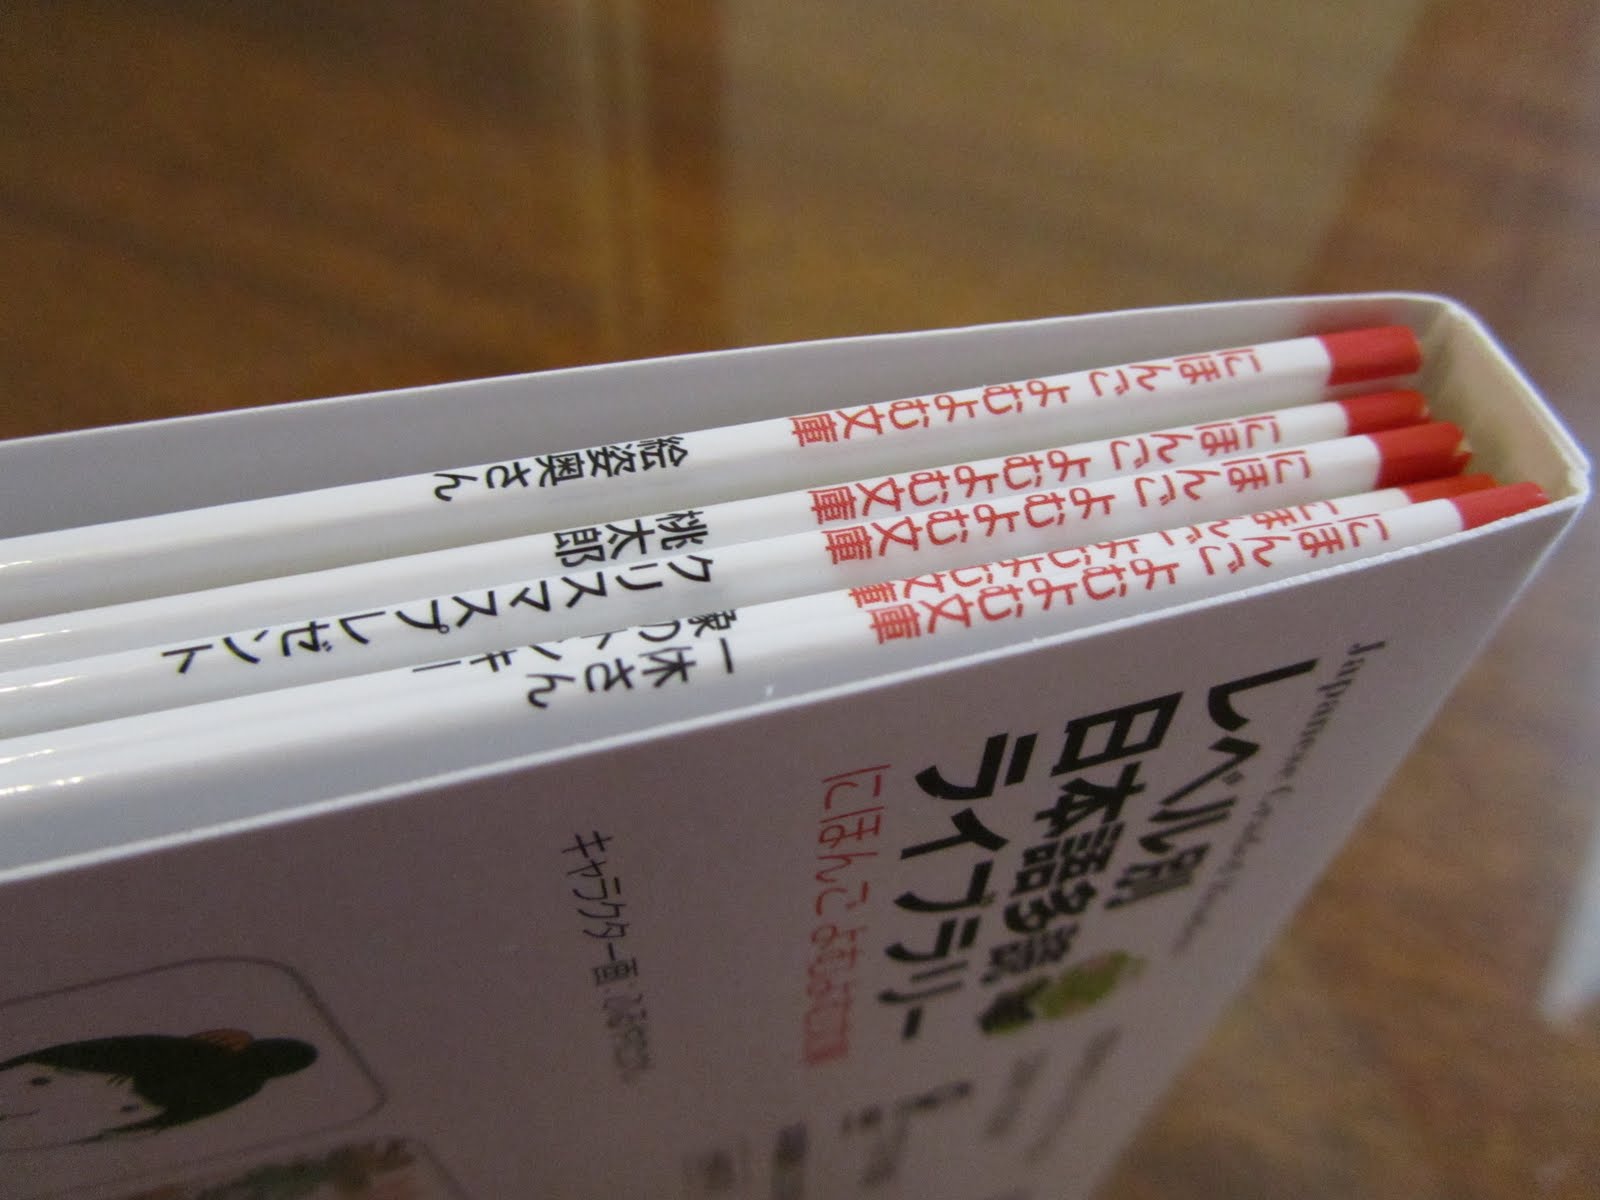 Wired in Japan: Learning to read Japanese with Japanese Graded Readers